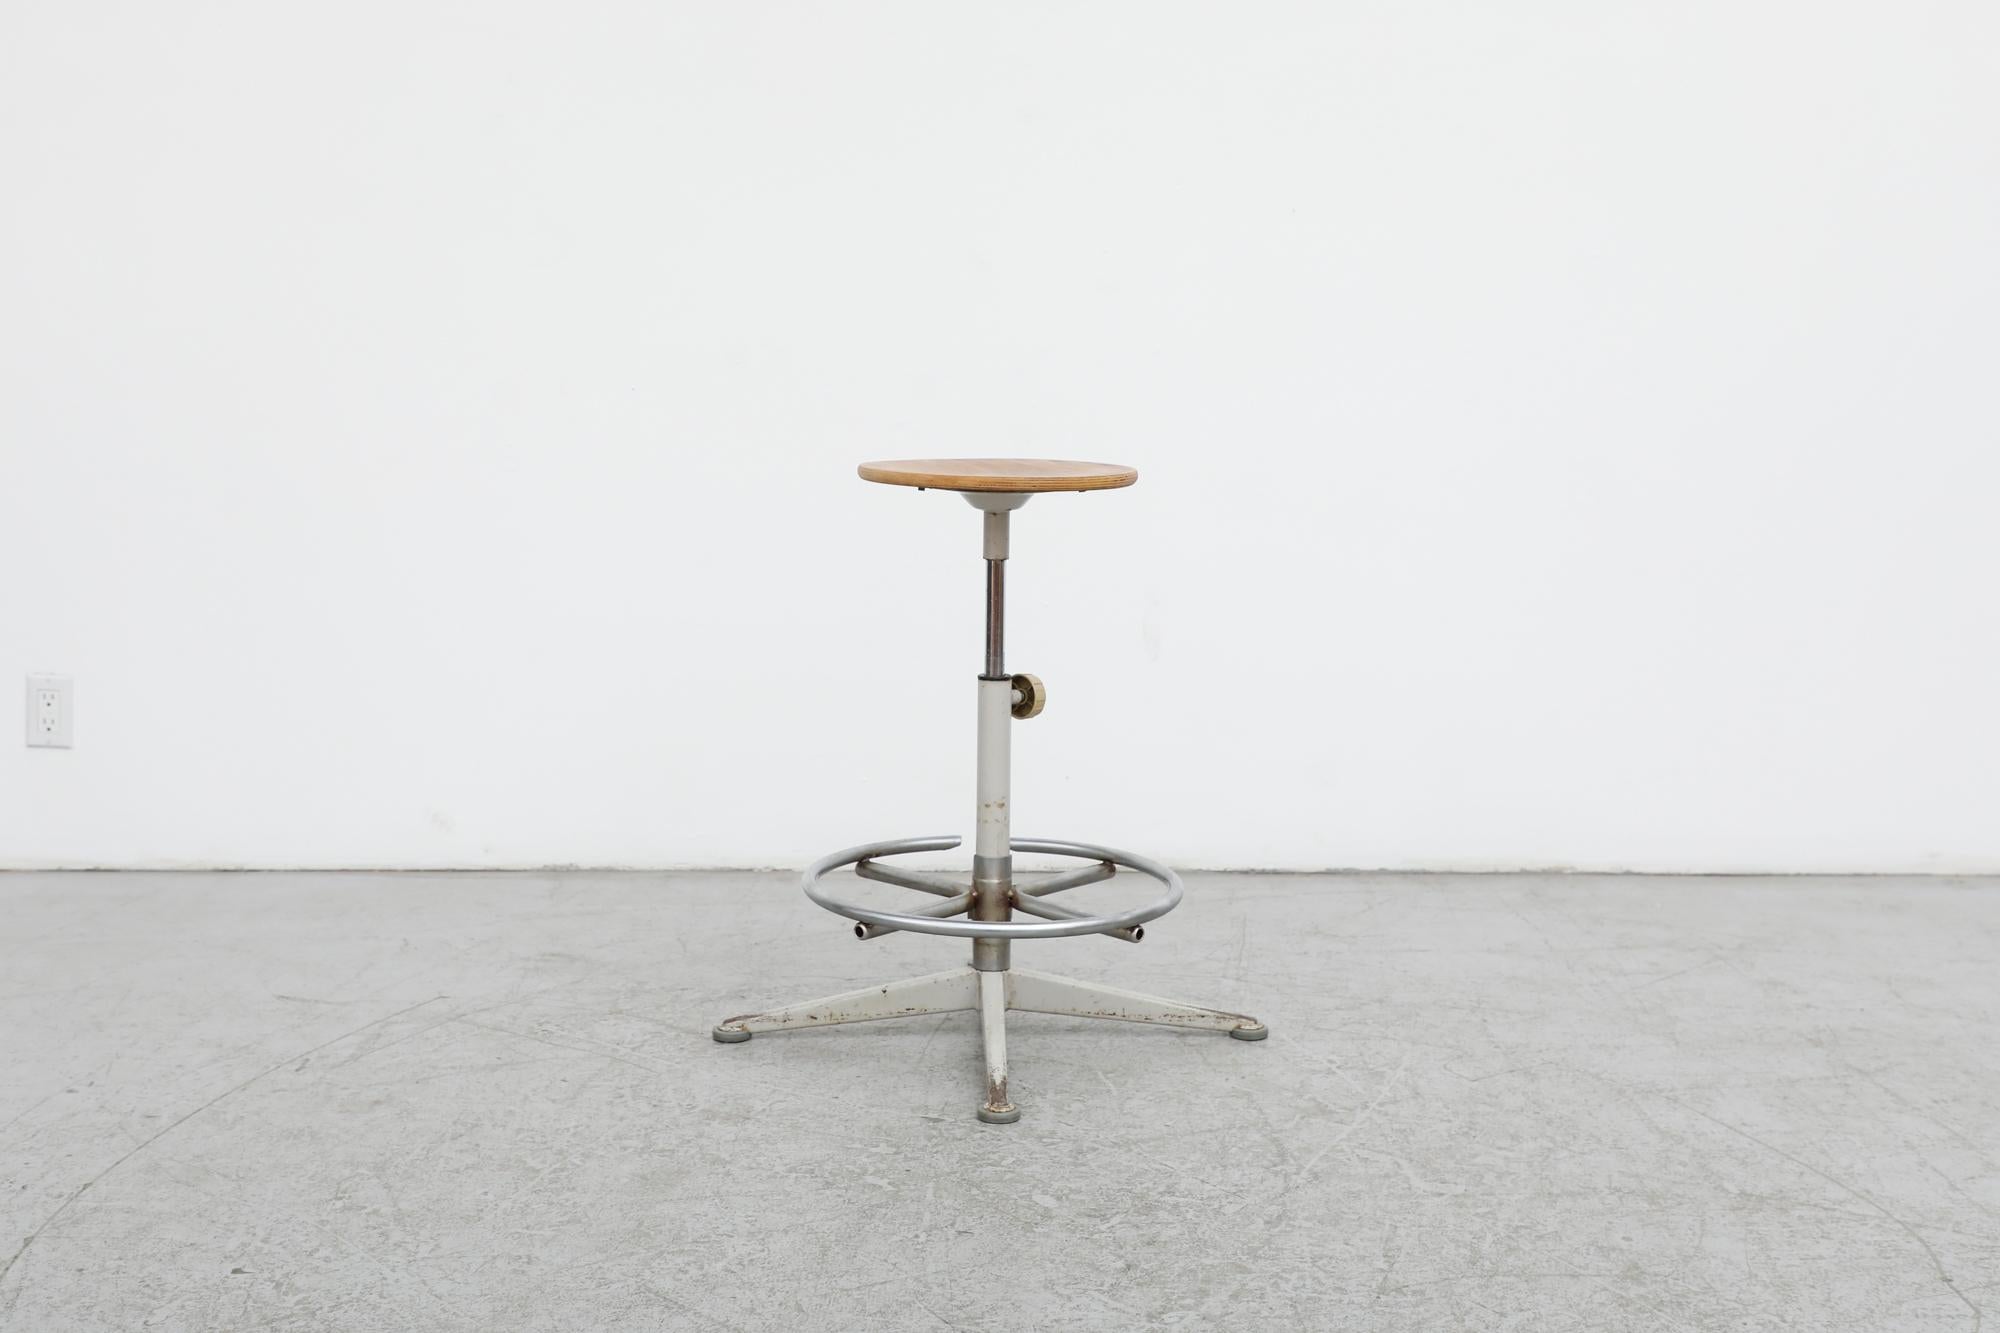 Original Friso Kramer drafting stool with Birch seat. Both the seat and the foot rest are height adjustable. In original condition with visible patina including some enamel wear and scratching which are consistent with its age and use.